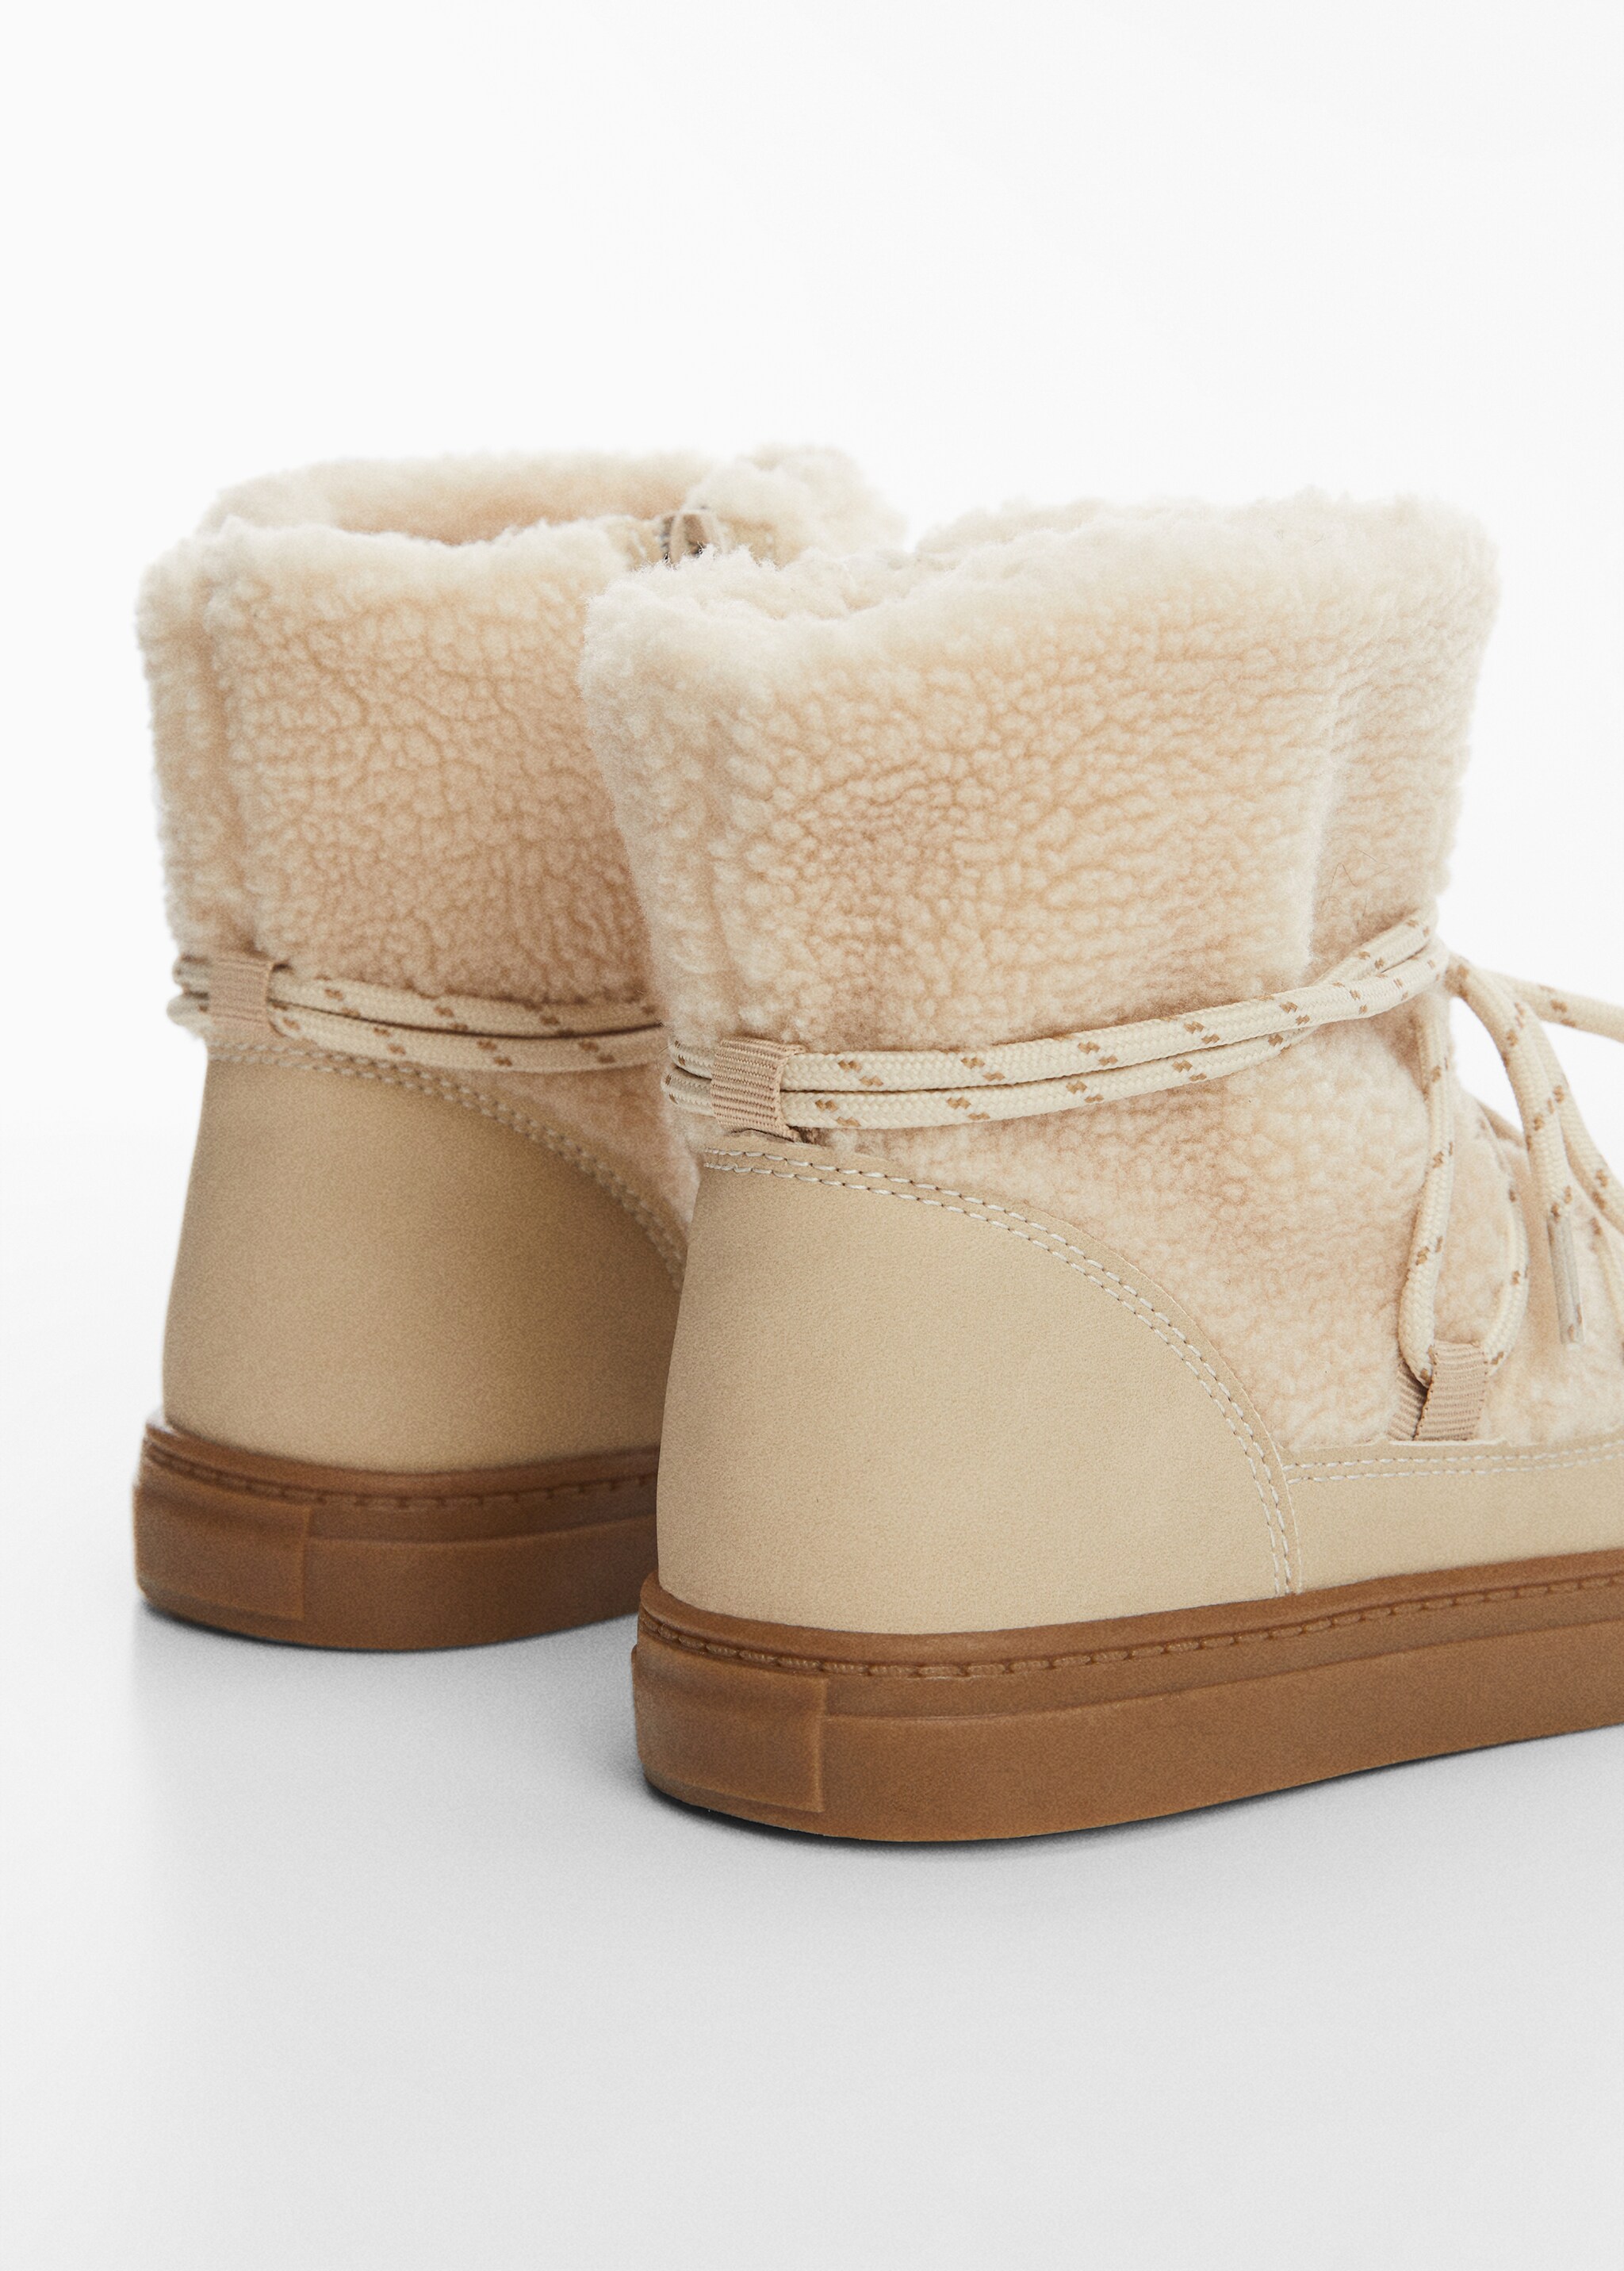 Shearling lace boots - Details of the article 1